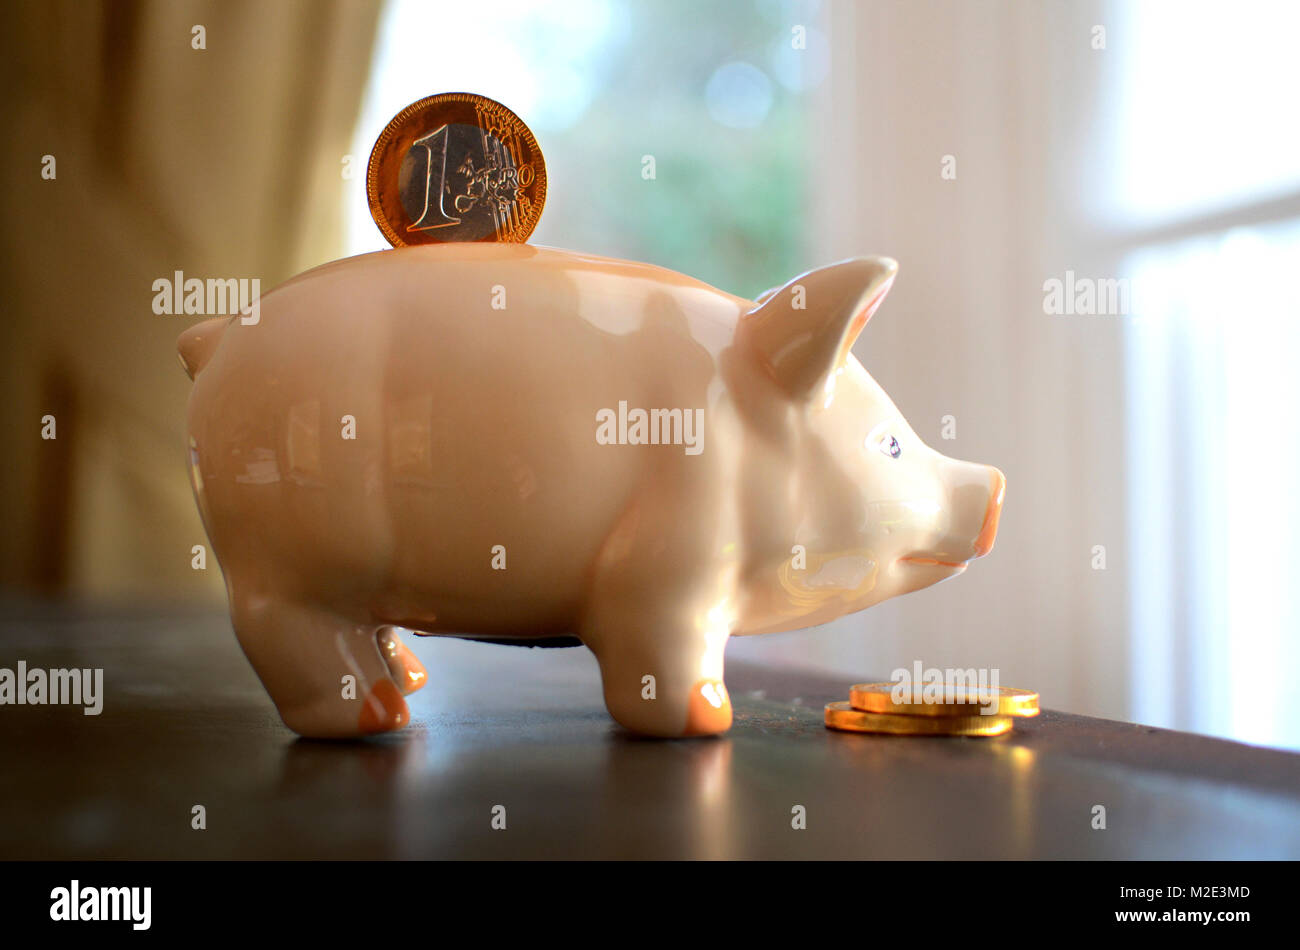 Coin in slot of piggy bank Stock Photo